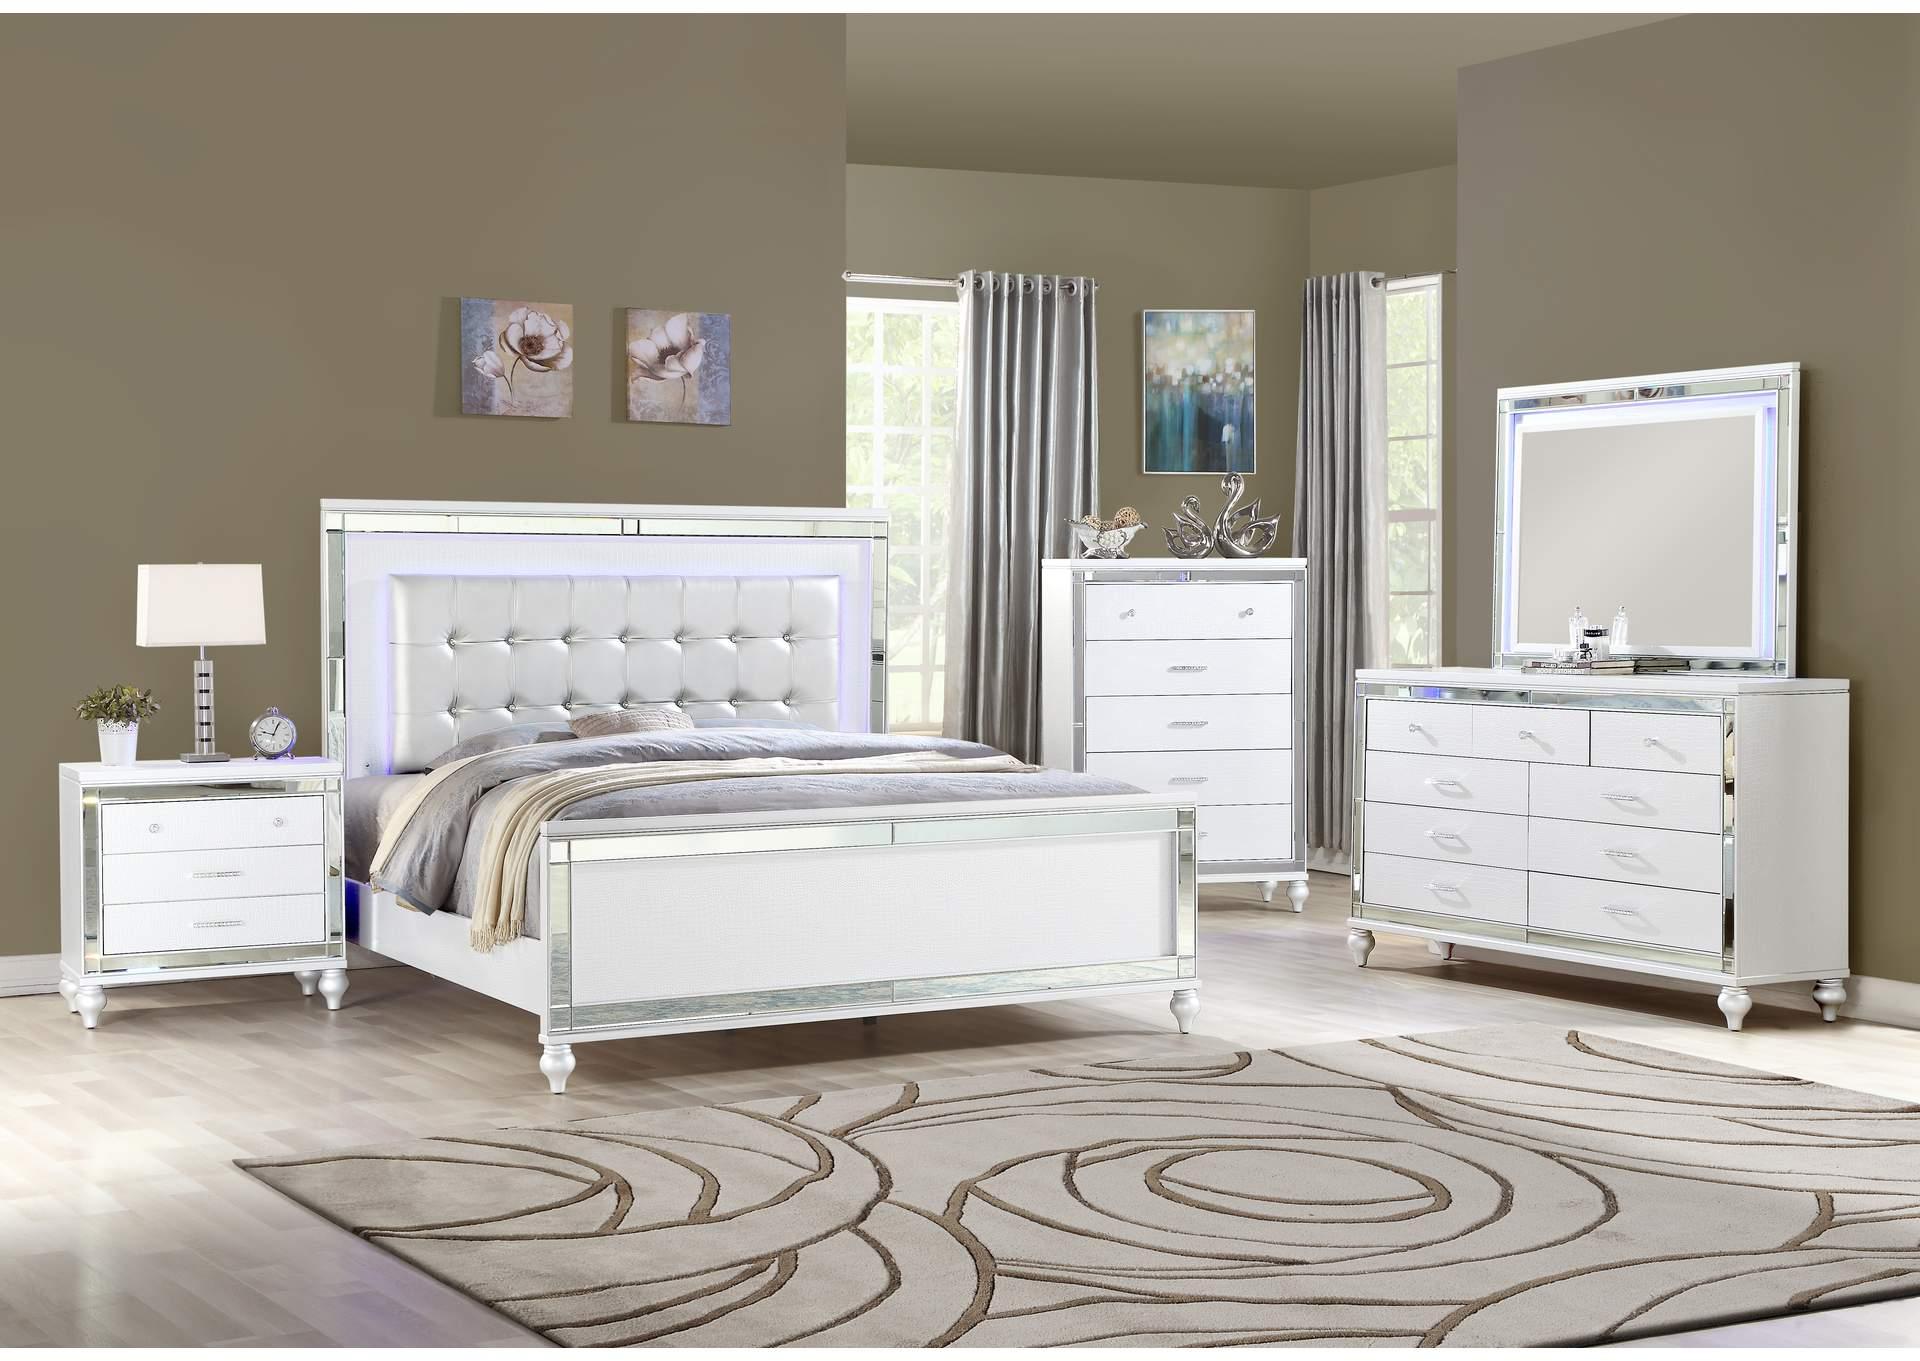 Contemporary, Modern Panel Bedroom Set STERLING White GHF-808857868930 in White Eco-Leather